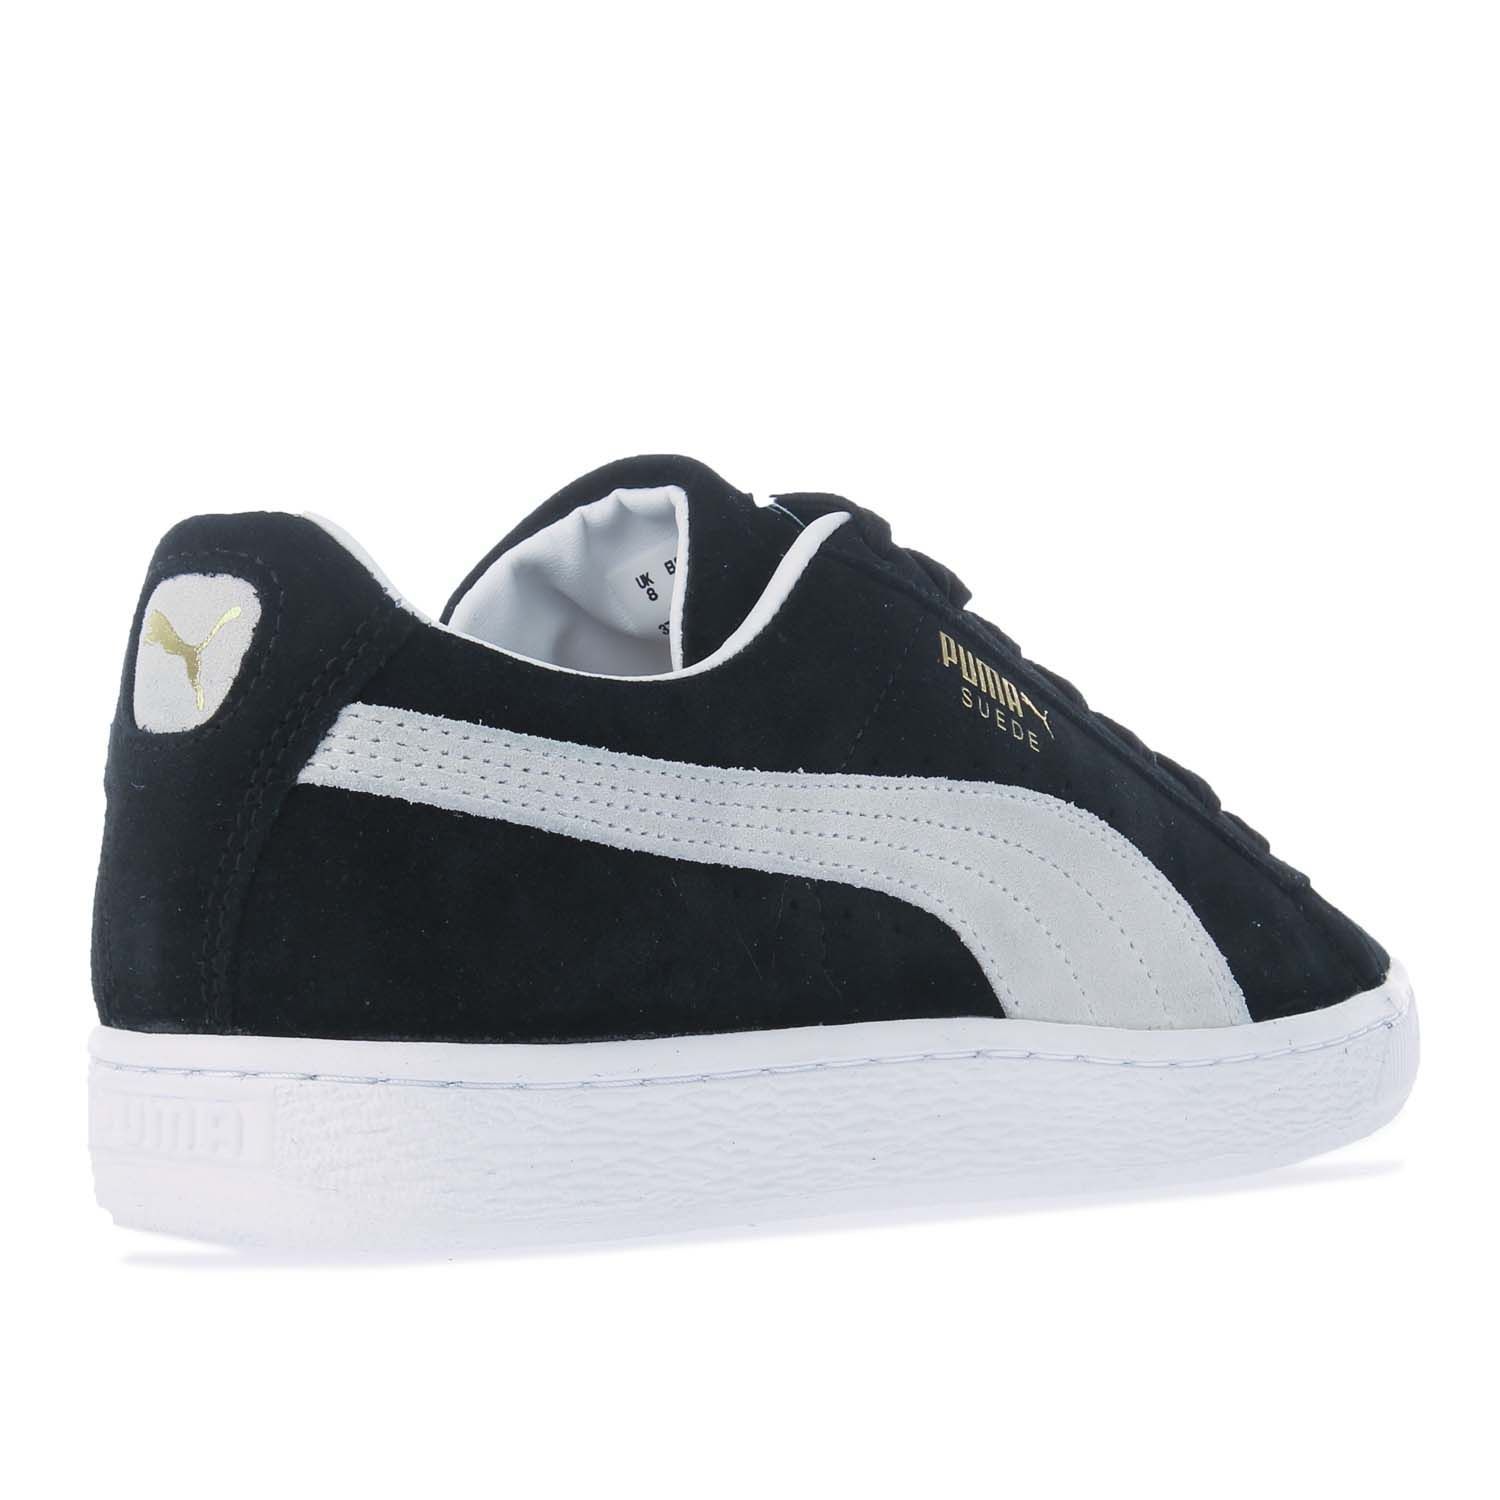 Puma Suede VTG Trainers in black- white.- Leather and Suede upper.- Lace fastening.- Round toe.- Classic PUMA Formstrip down the sidewalls.- Branded insole.- Rubber outsole.- Leather and Suede Upper  Leather Lining  Synthetic Sole.- Ref: 37492105X